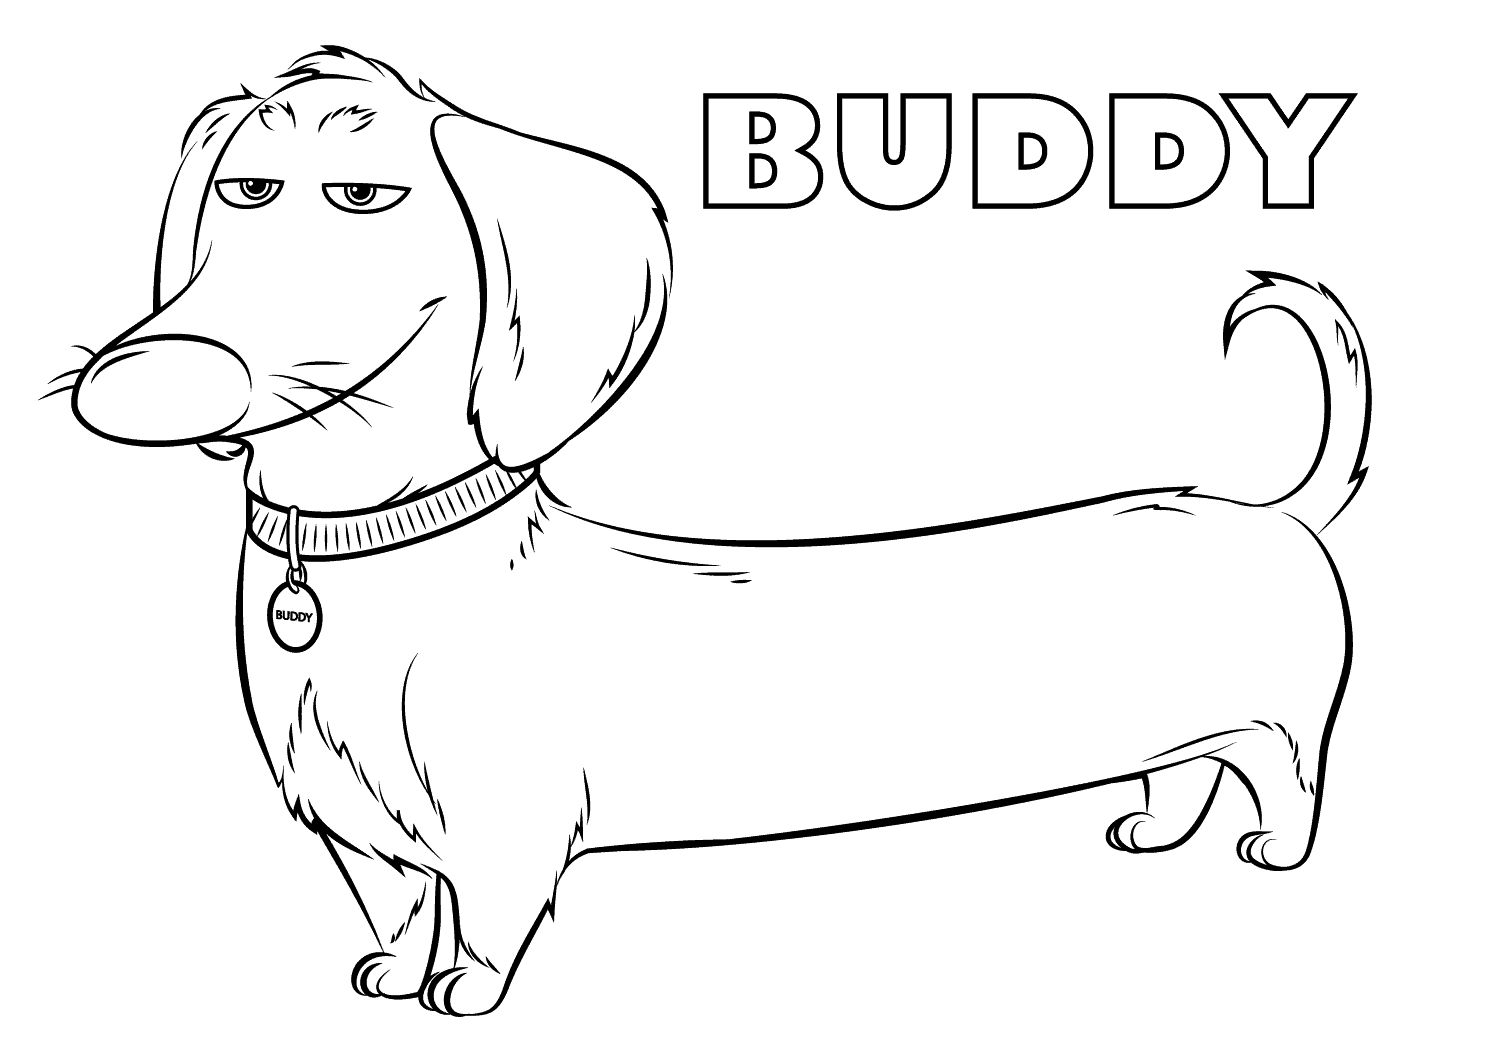 Buddy Coloring Page - Free Printable Coloring Pages for Kids